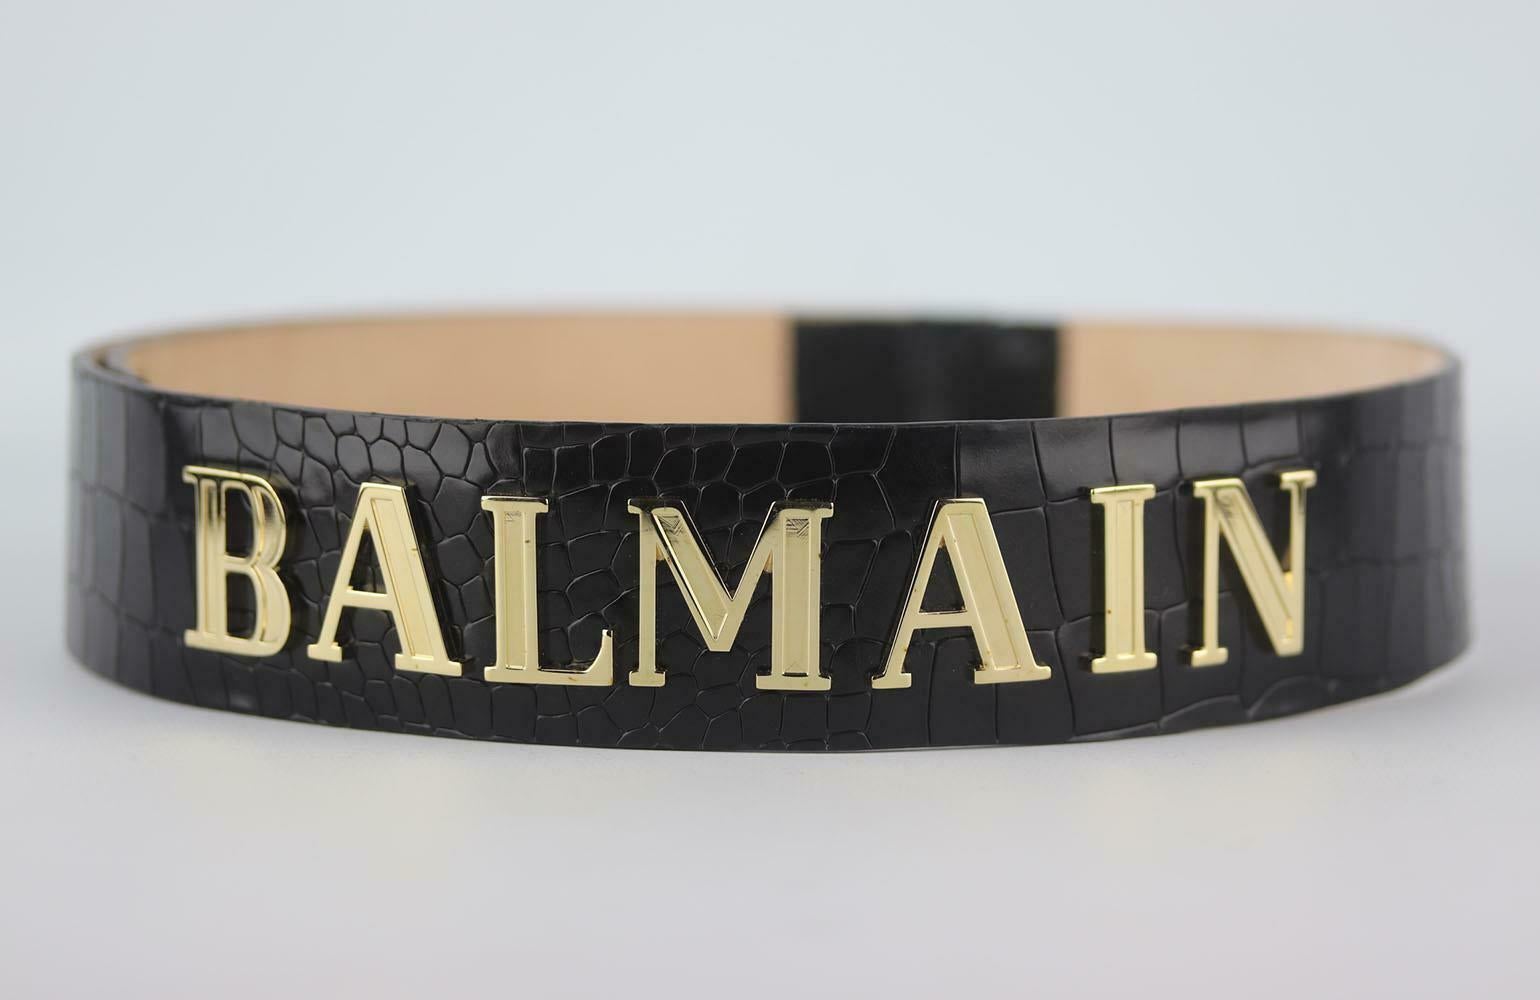 We can always count on Balmain for a glamorous finishing touch - this waist belt is made from soft croc-embossed leather, it has 'BALMAIN' across the front in gold and has snap fastening and you'll notice they're the same the lion-embossed buttons